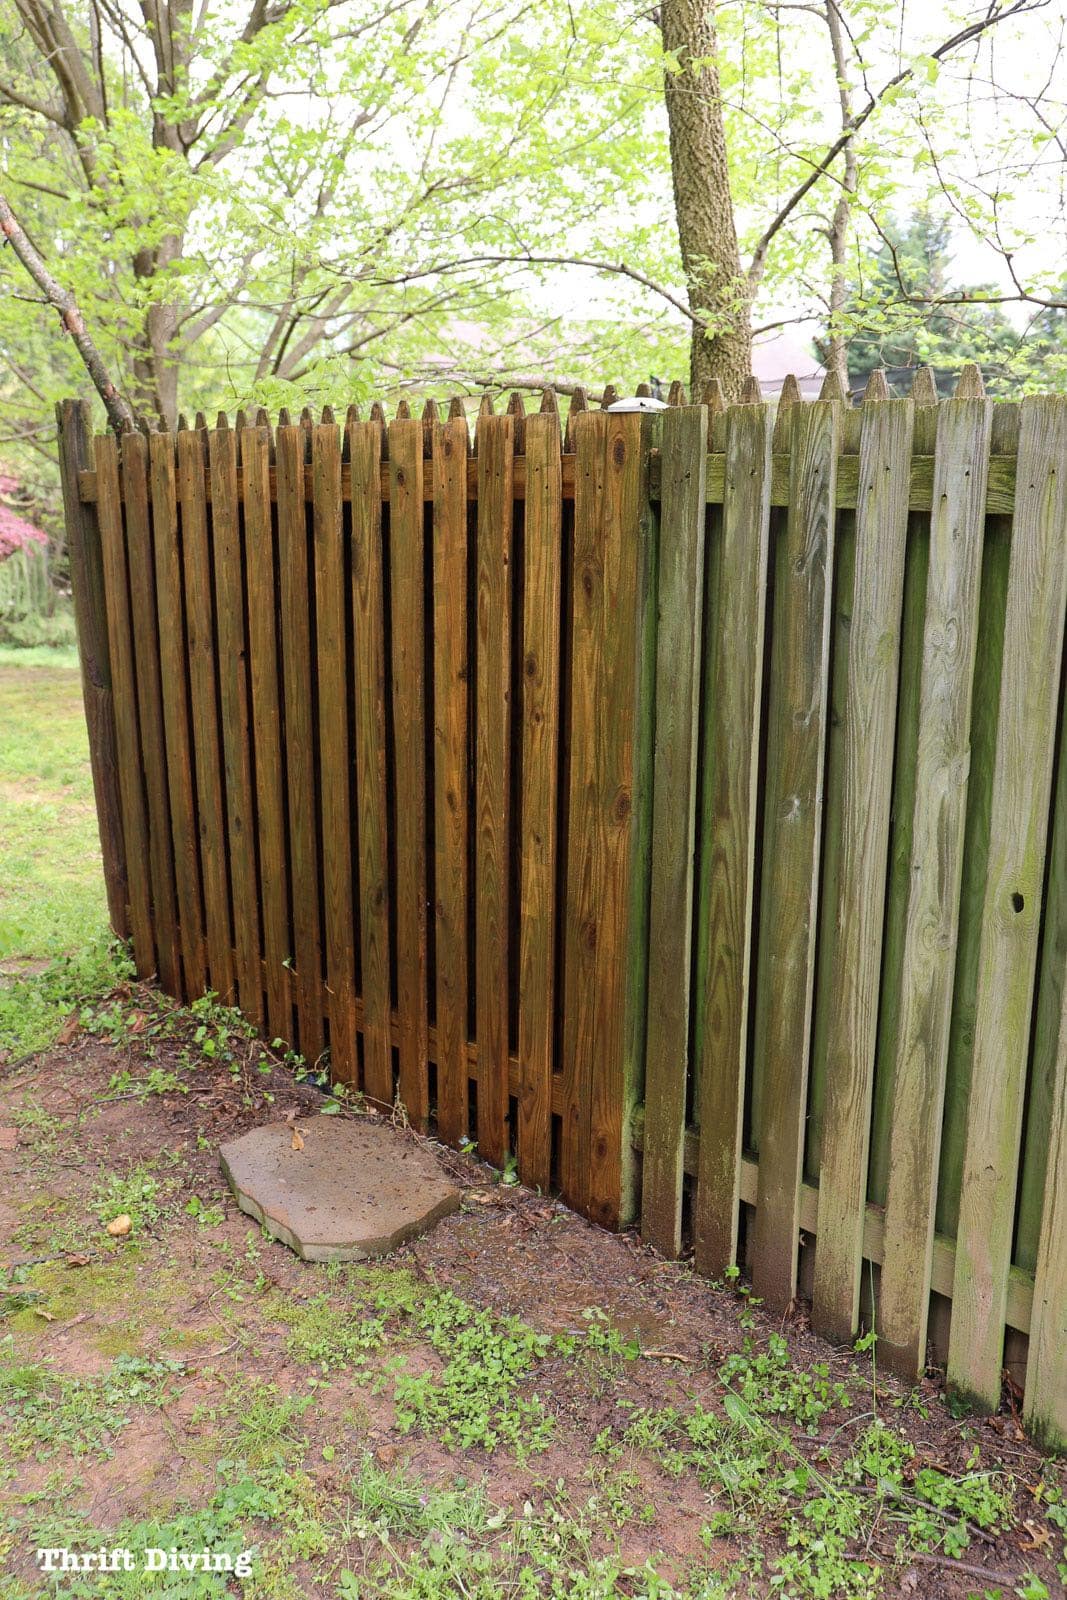 How to Use a Paint Sprayer to Paint a Wood Fence - You must pressure wash the fence first before painting to remove the mold and green scum. - Thrift Diving